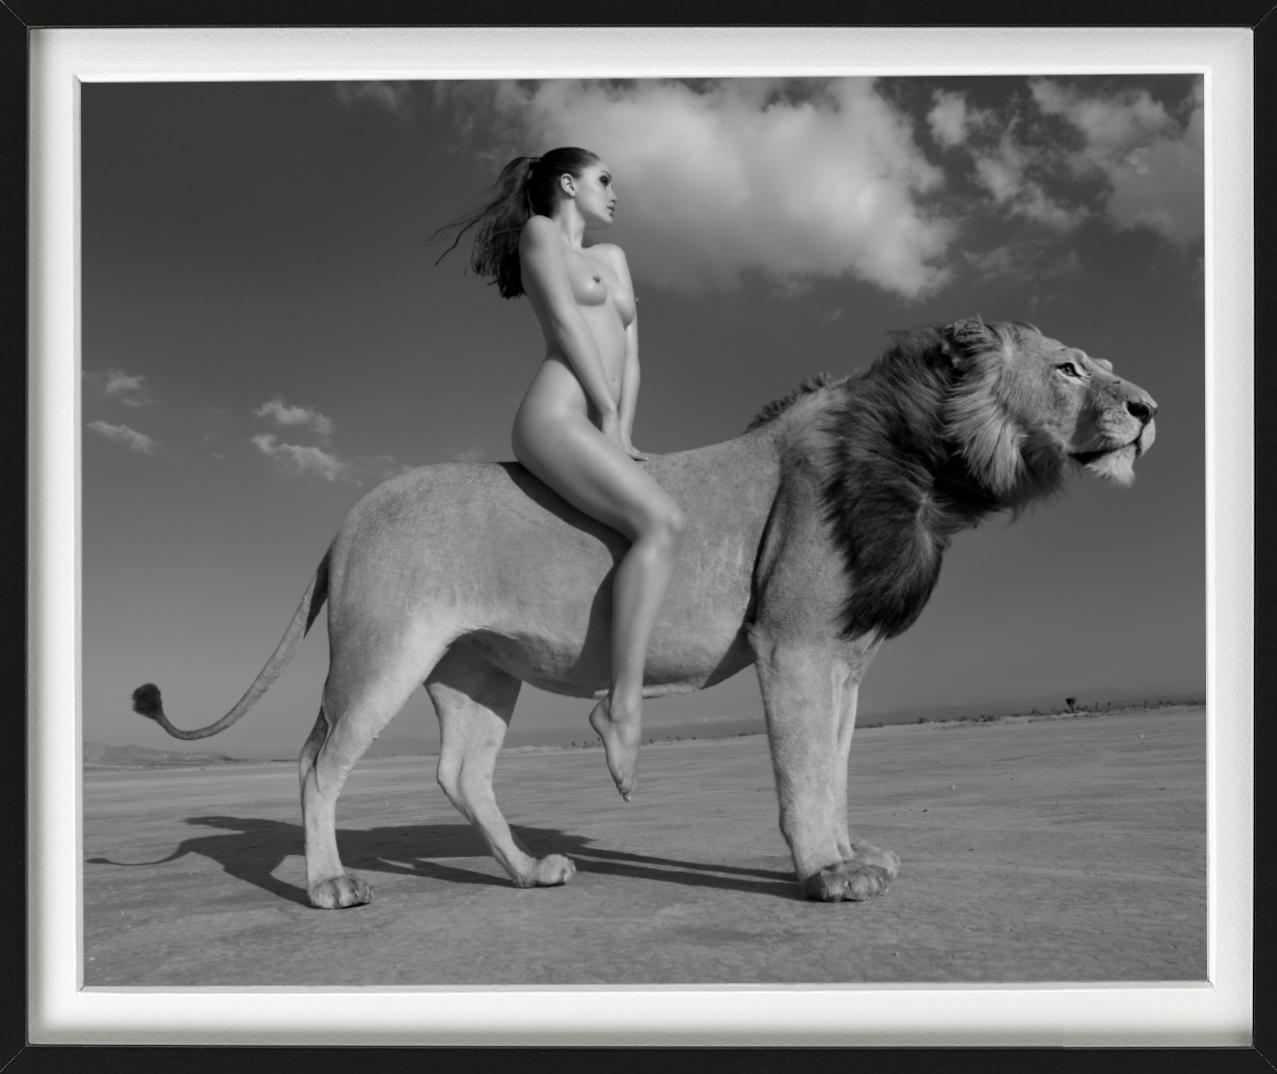 Angela rides the lion -  nude with lion in the desert, fine art photography 2008 - Gray Nude Photograph by Sylvie Blum